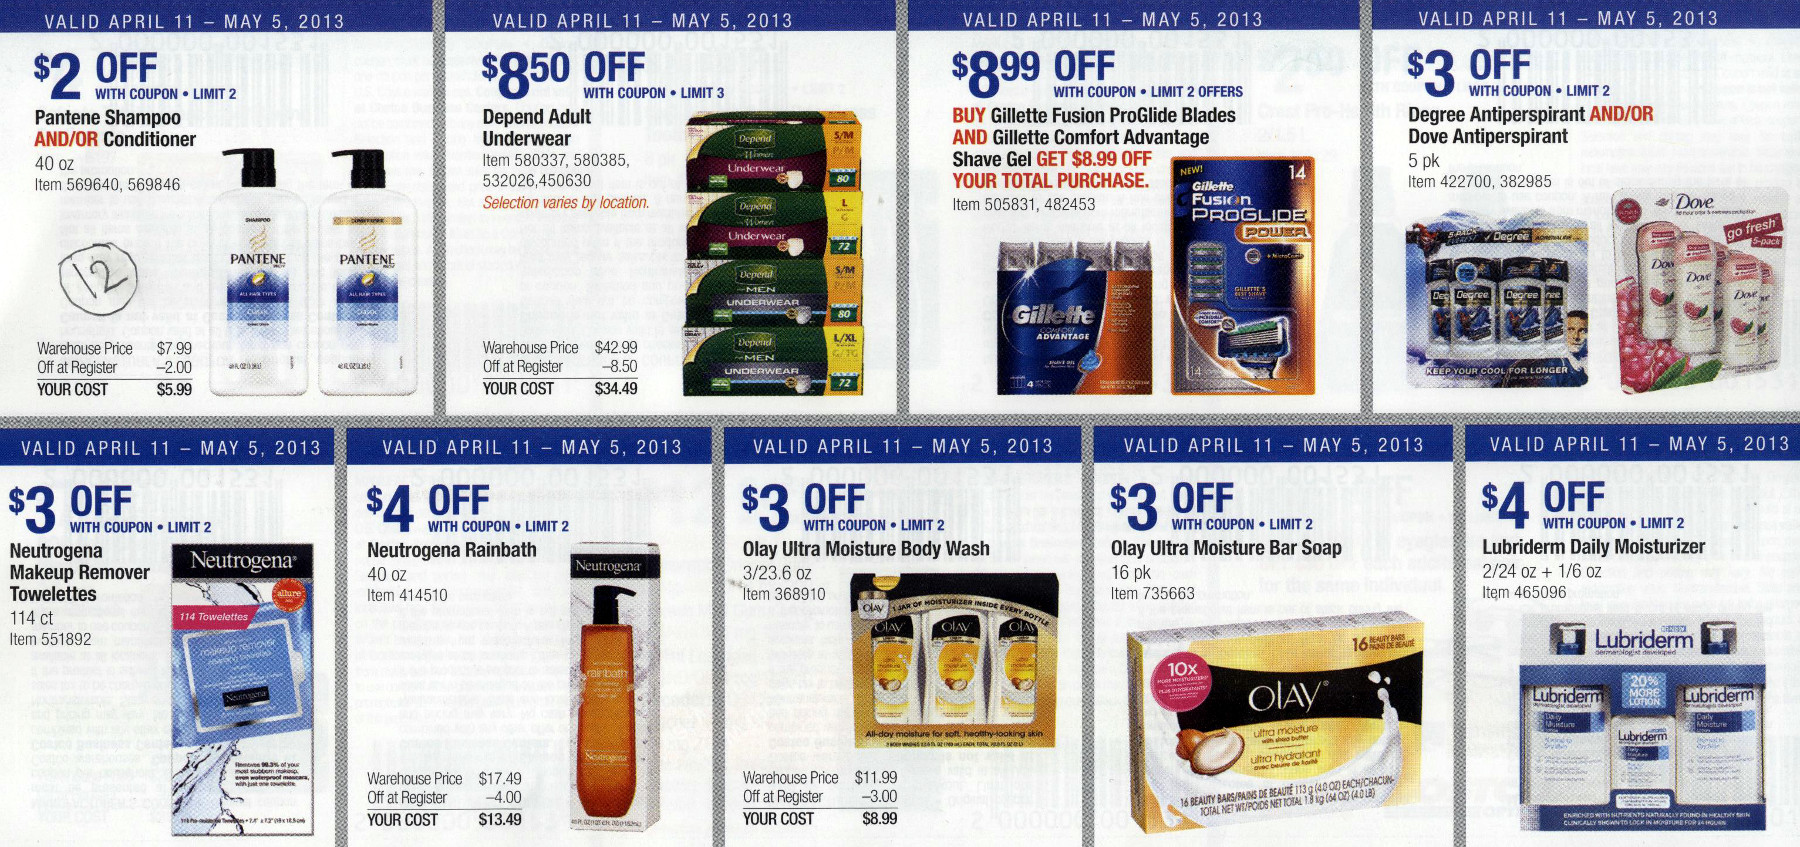 Coupon book full size page -> 12 <-